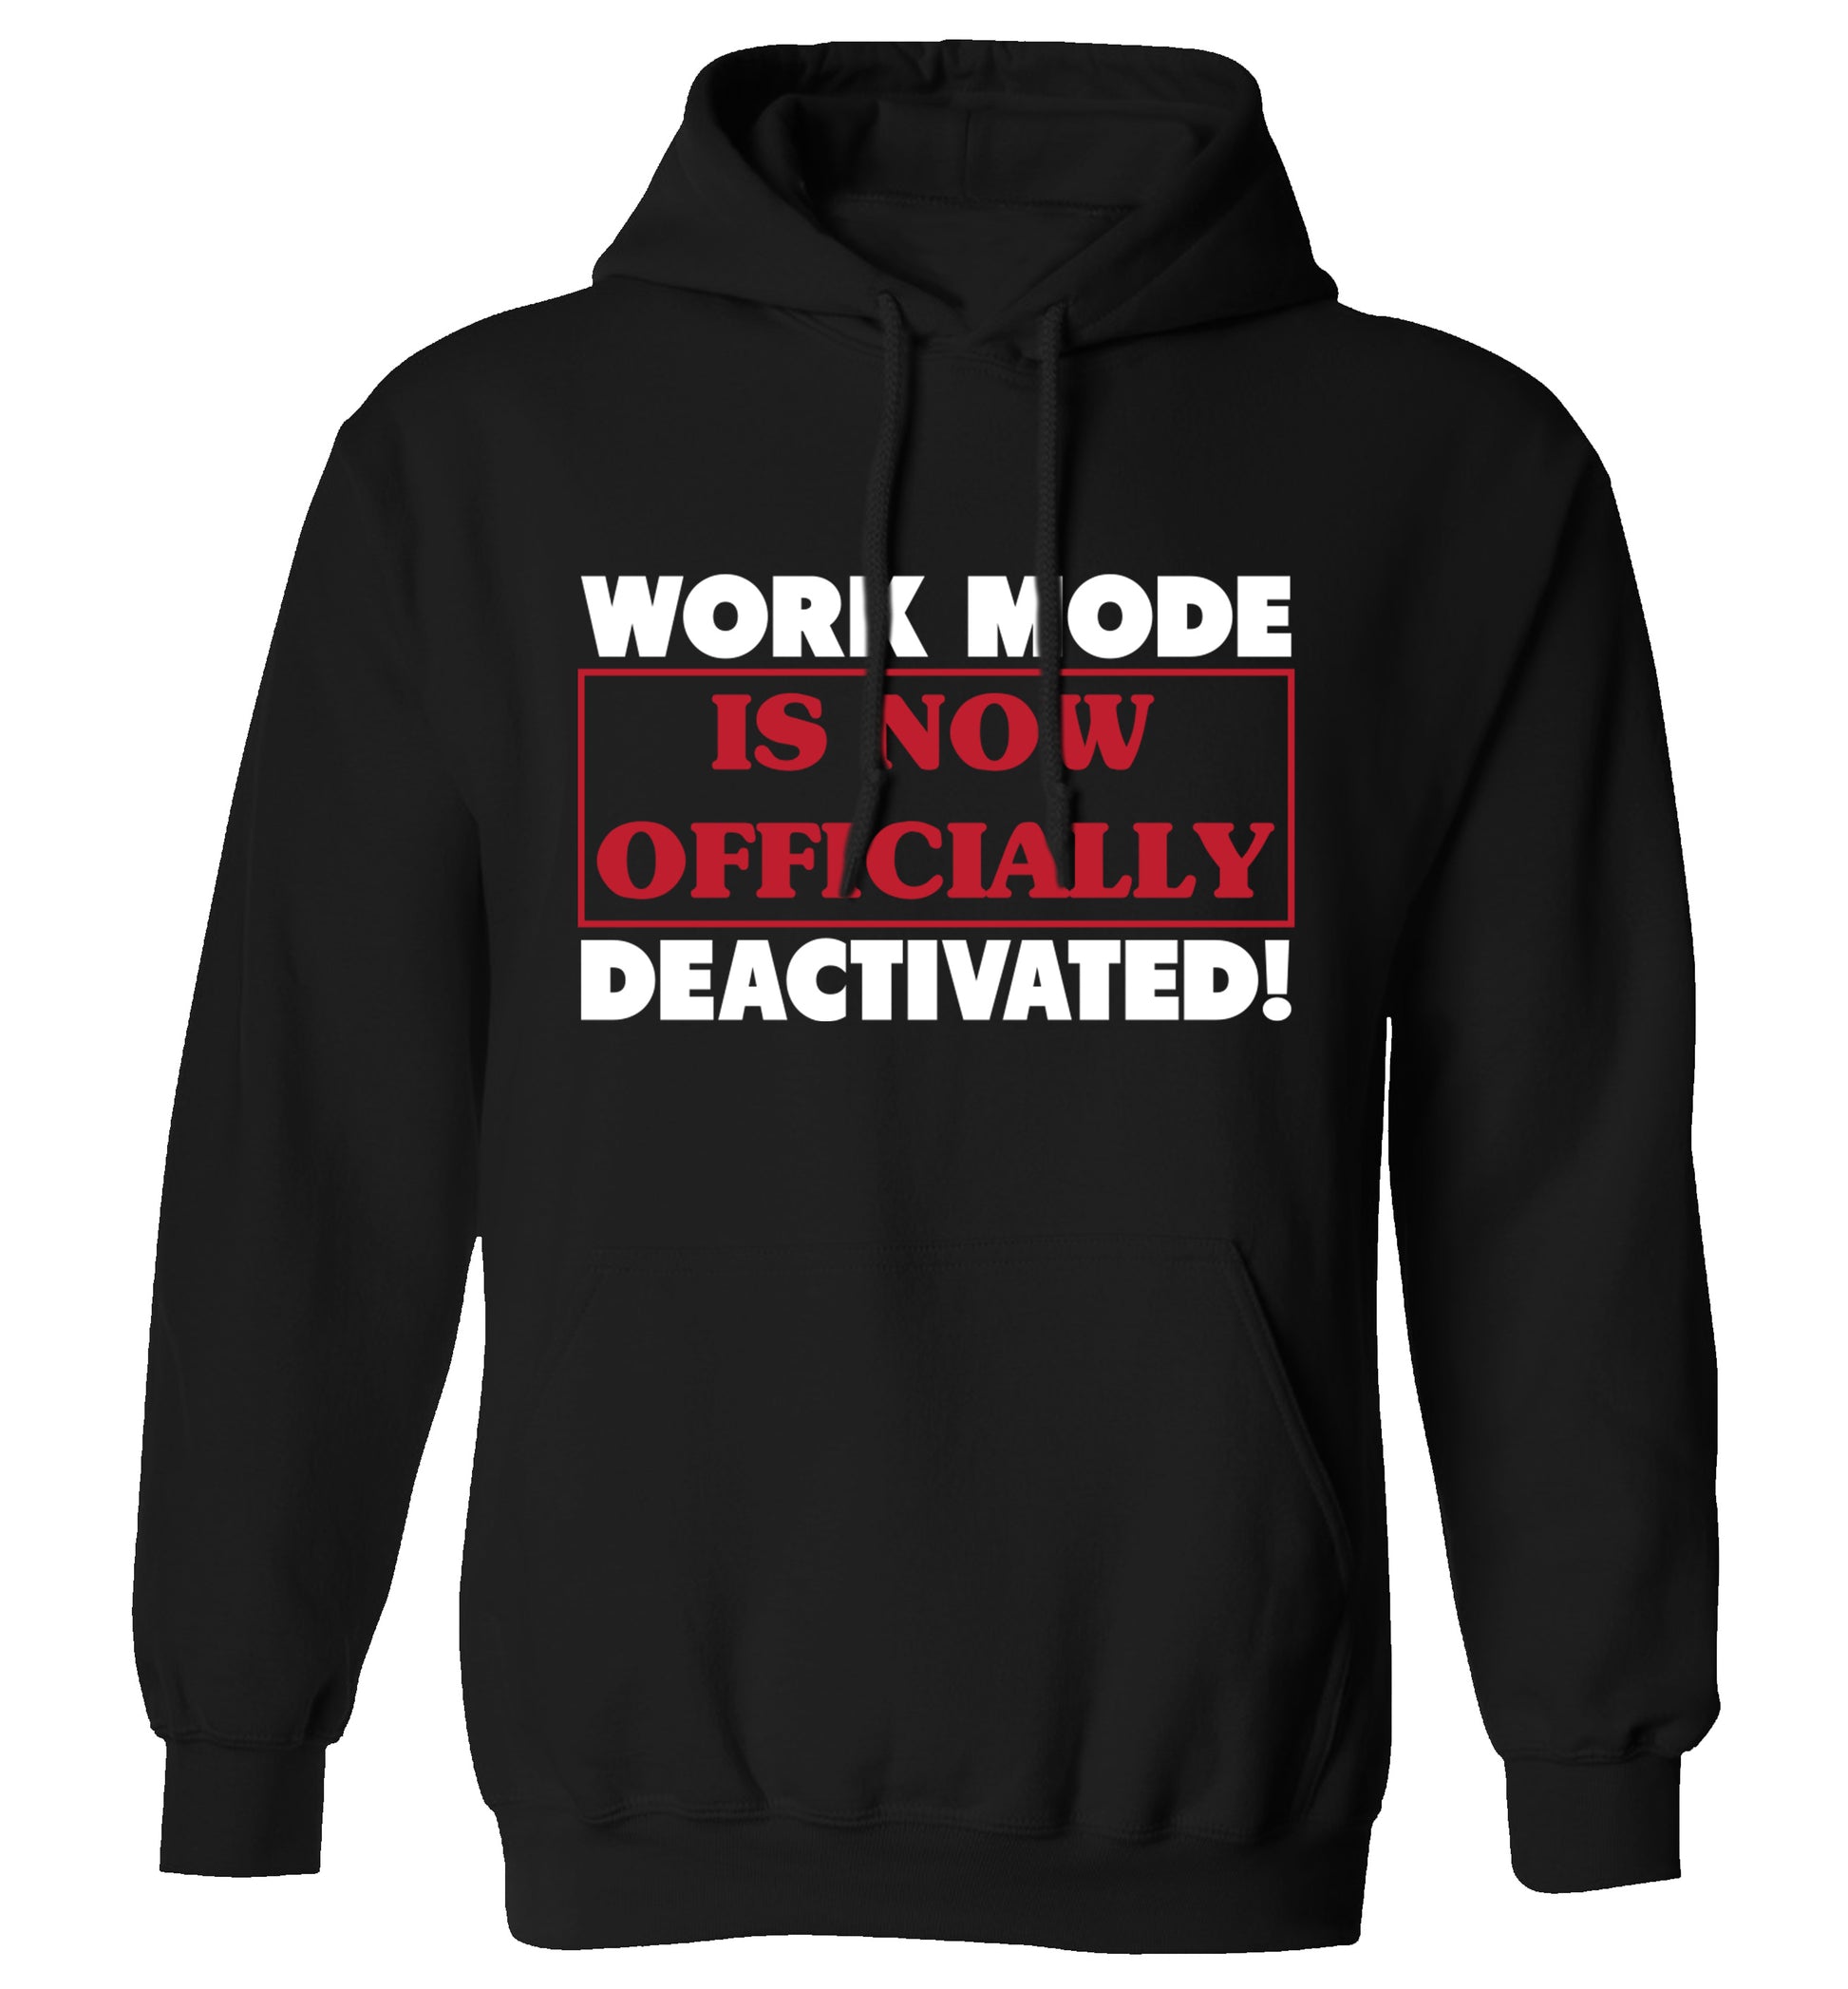 Work mode is now officially deactivated adults unisex black hoodie 2XL